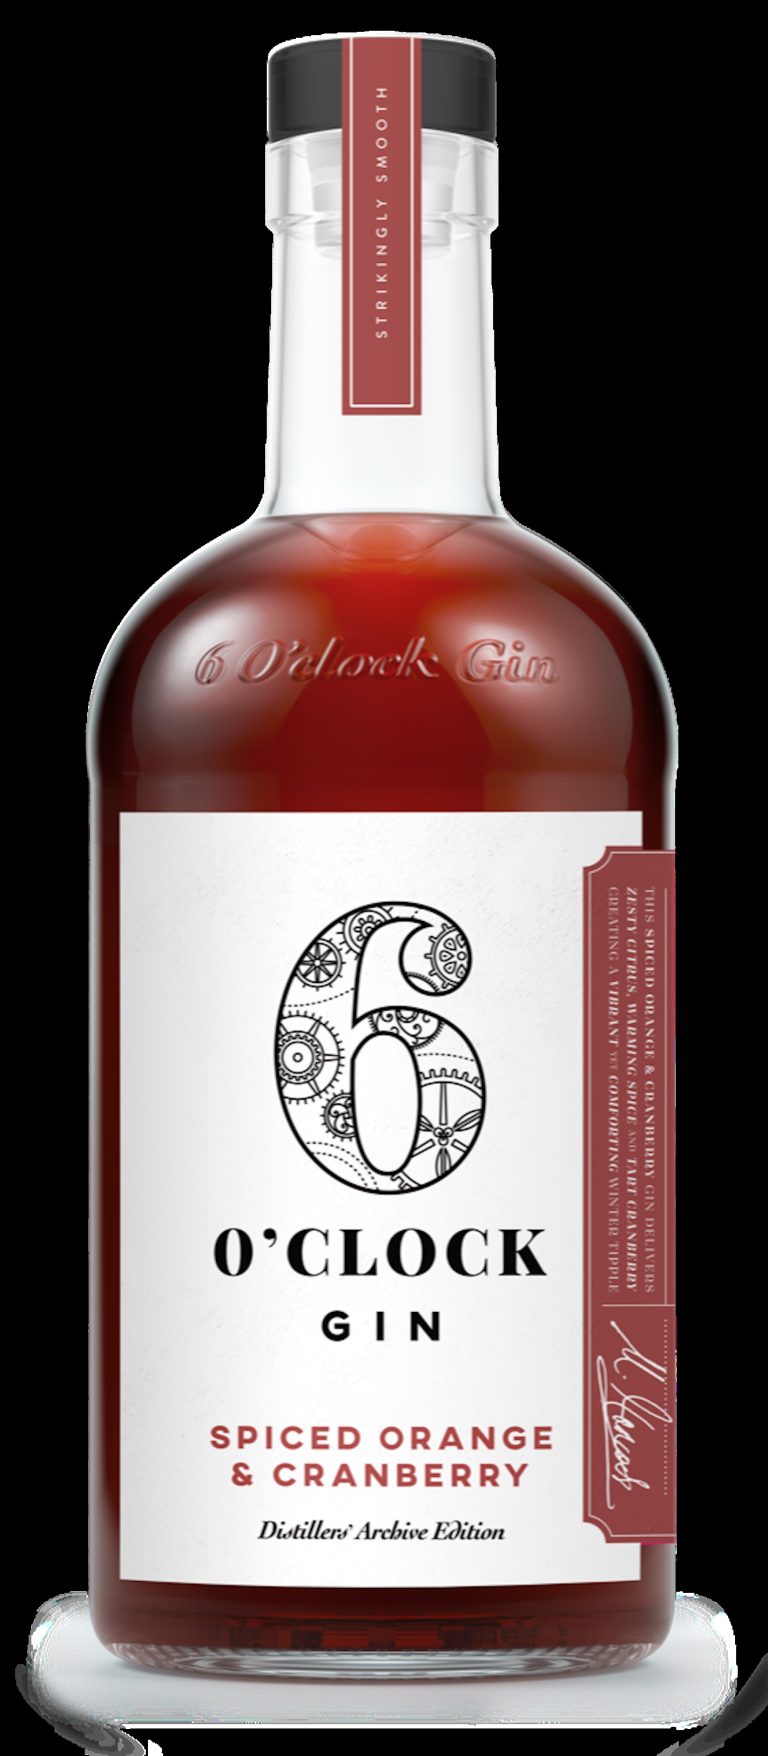 6 O’clock Gin launches Spiced Orange and Cranberry variant